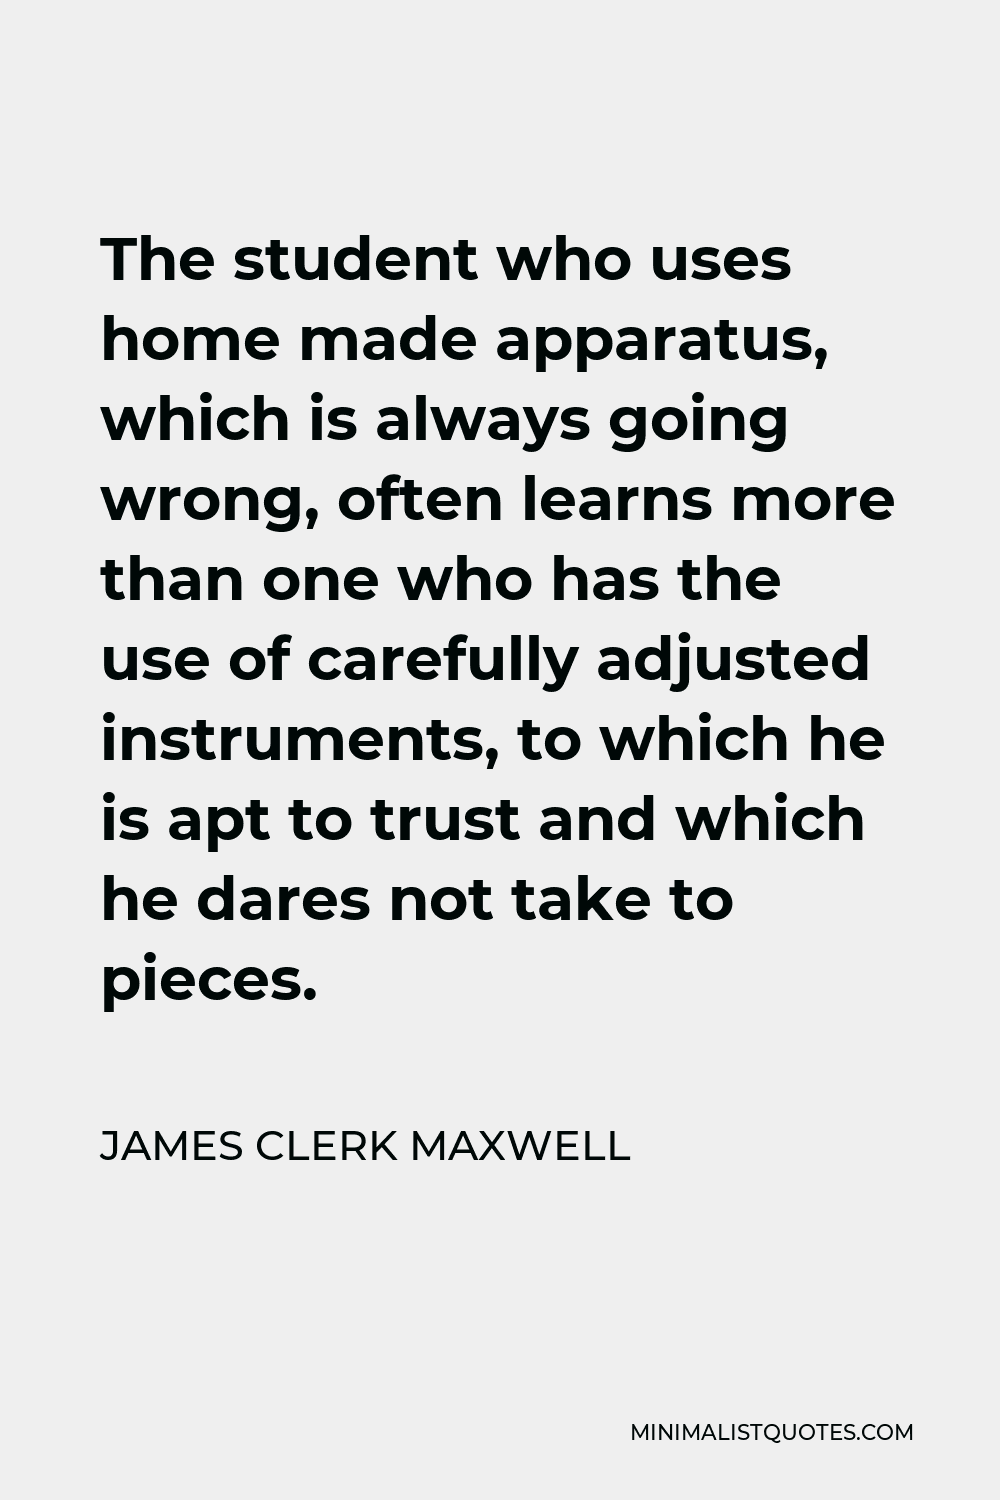 James Clerk Maxwell Quote - The student who uses home made apparatus, which is always going wrong, often learns more than one who has the use of carefully adjusted instruments, to which he is apt to trust and which he dares not take to pieces.